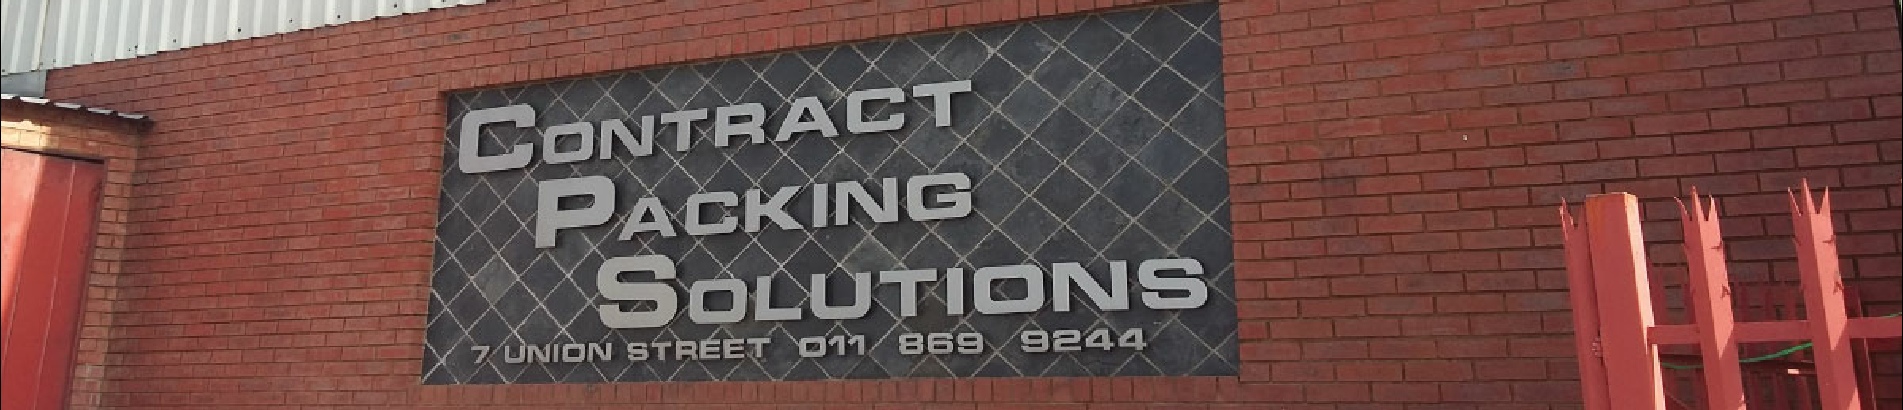 Contract Packing Solutions - Building